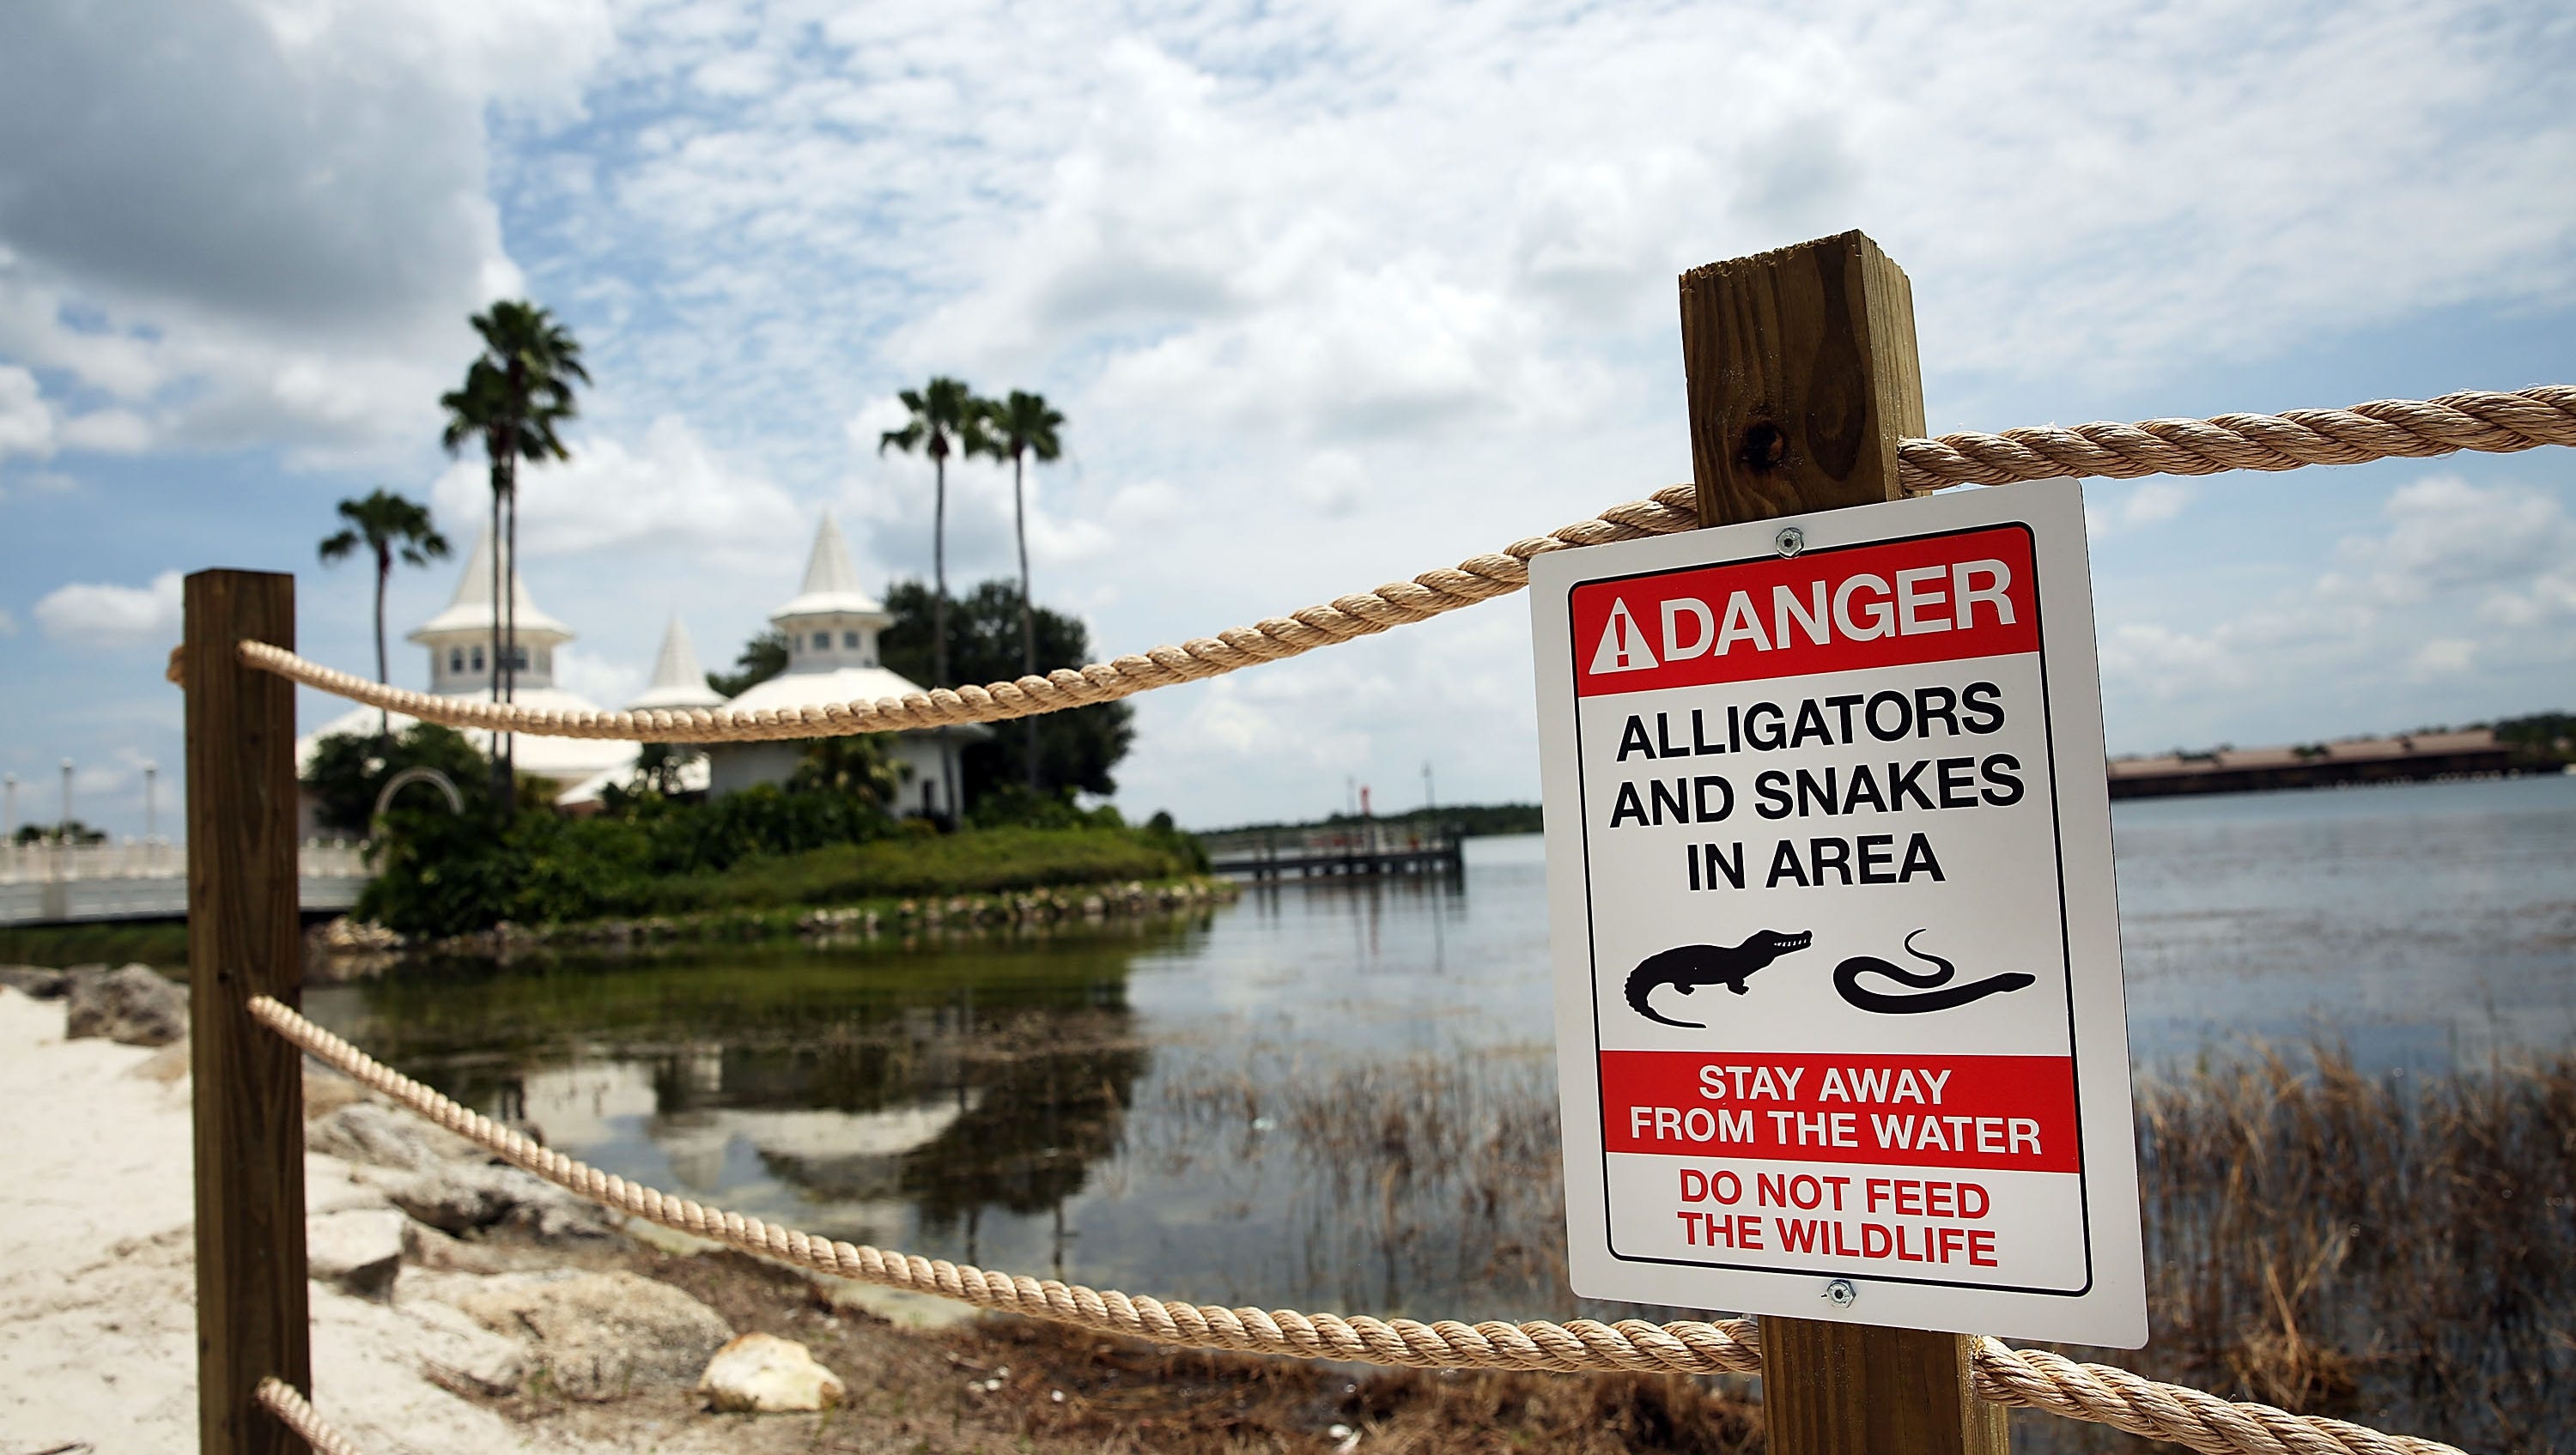 Alligator That Killed Tot At Disney May Have Lost Fear Of Humans